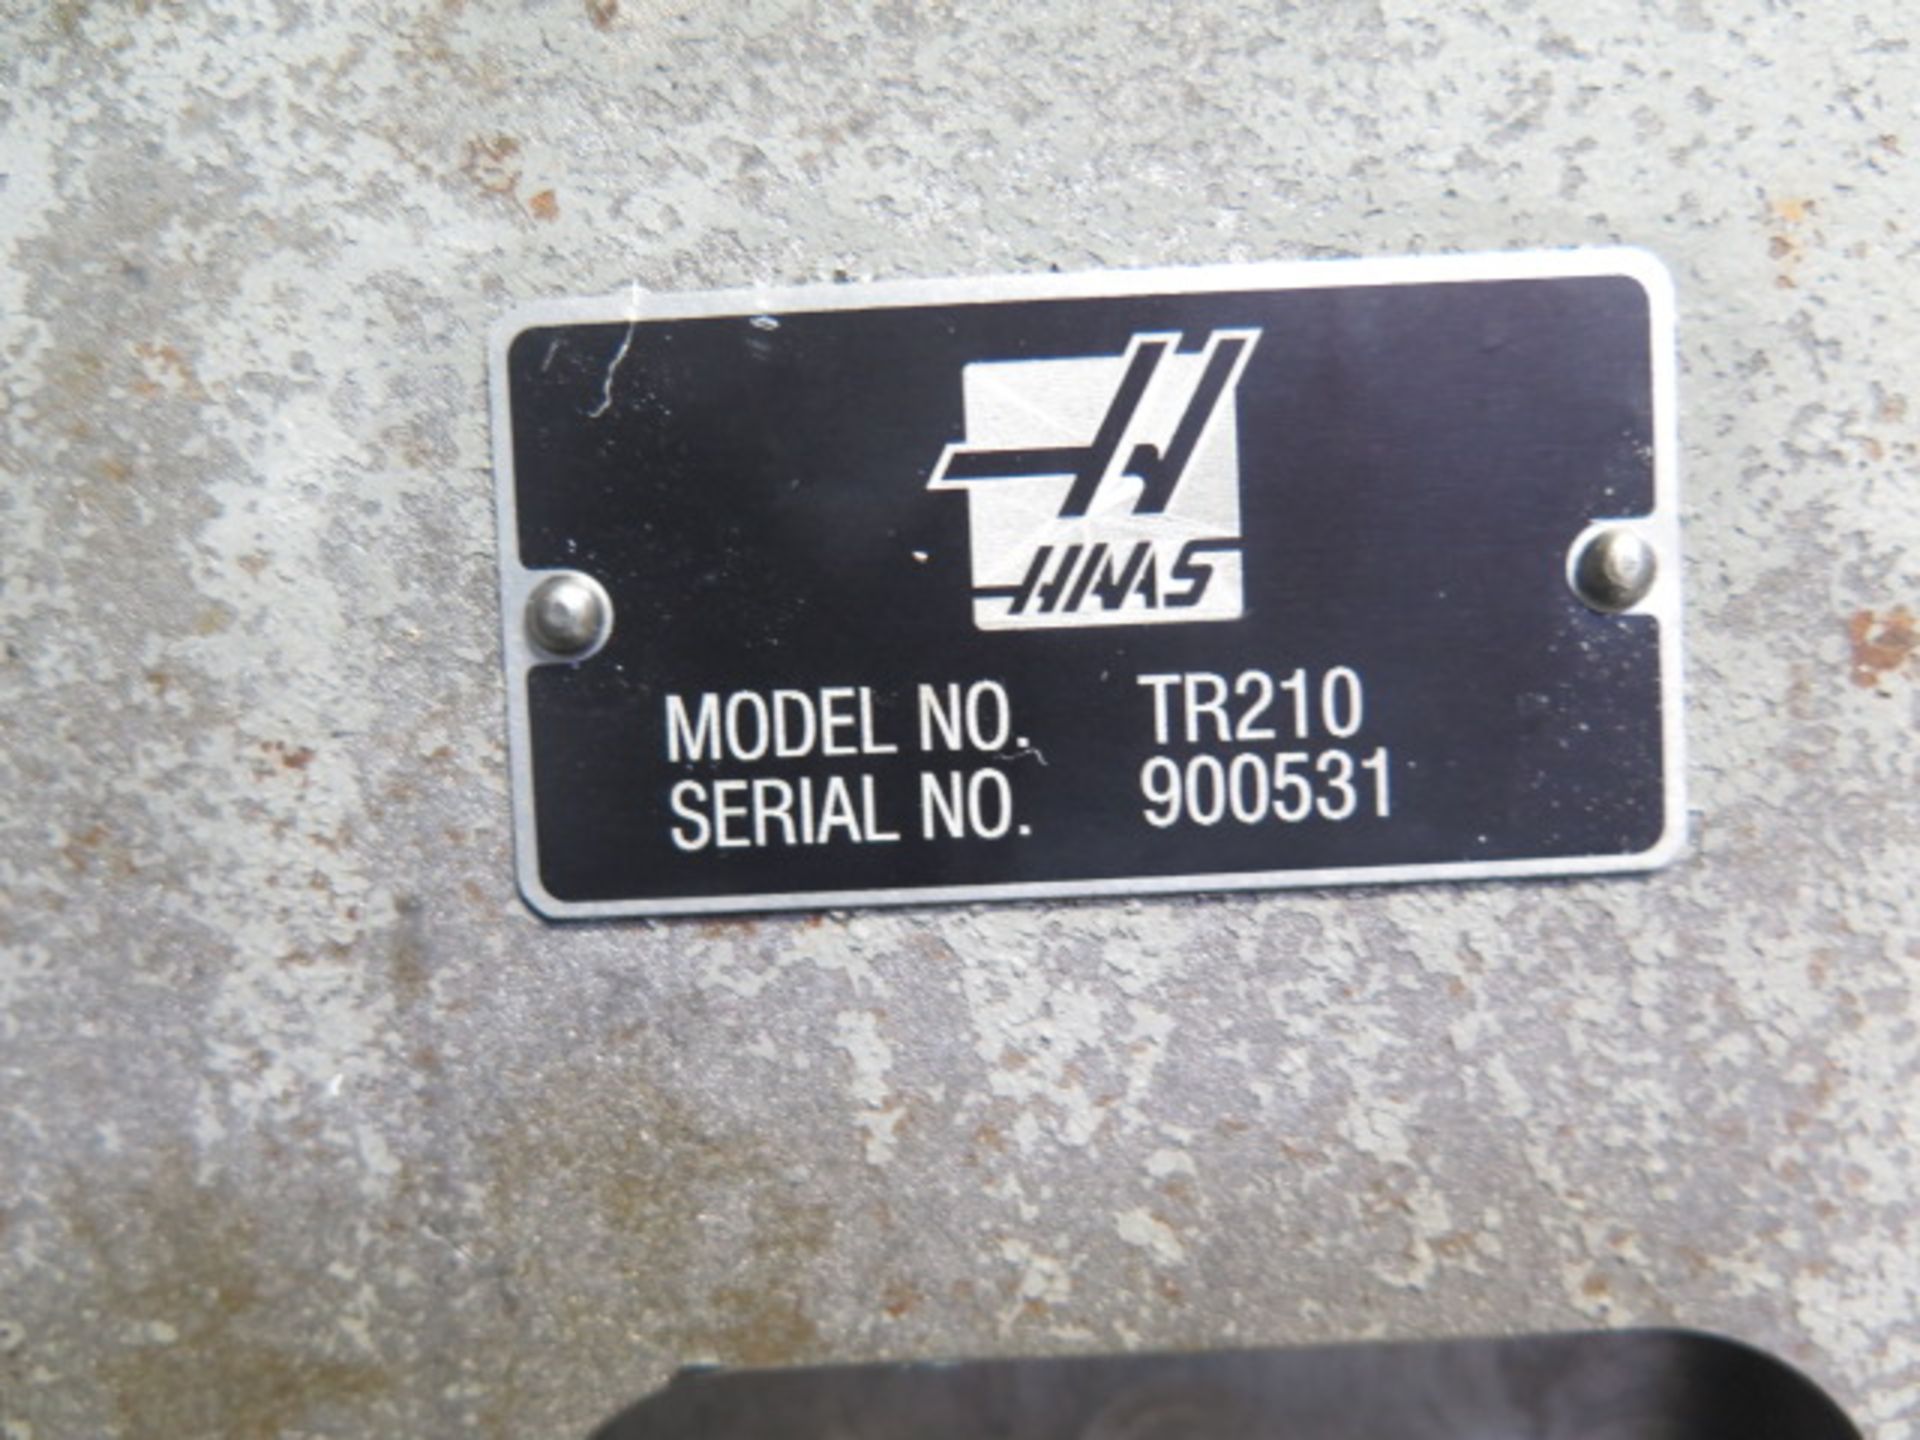 Haas TR210 4th/5th Axes Trunnion Style Rotary Head (SOLD AS-IS - NO WARRANTY) - Image 6 of 6